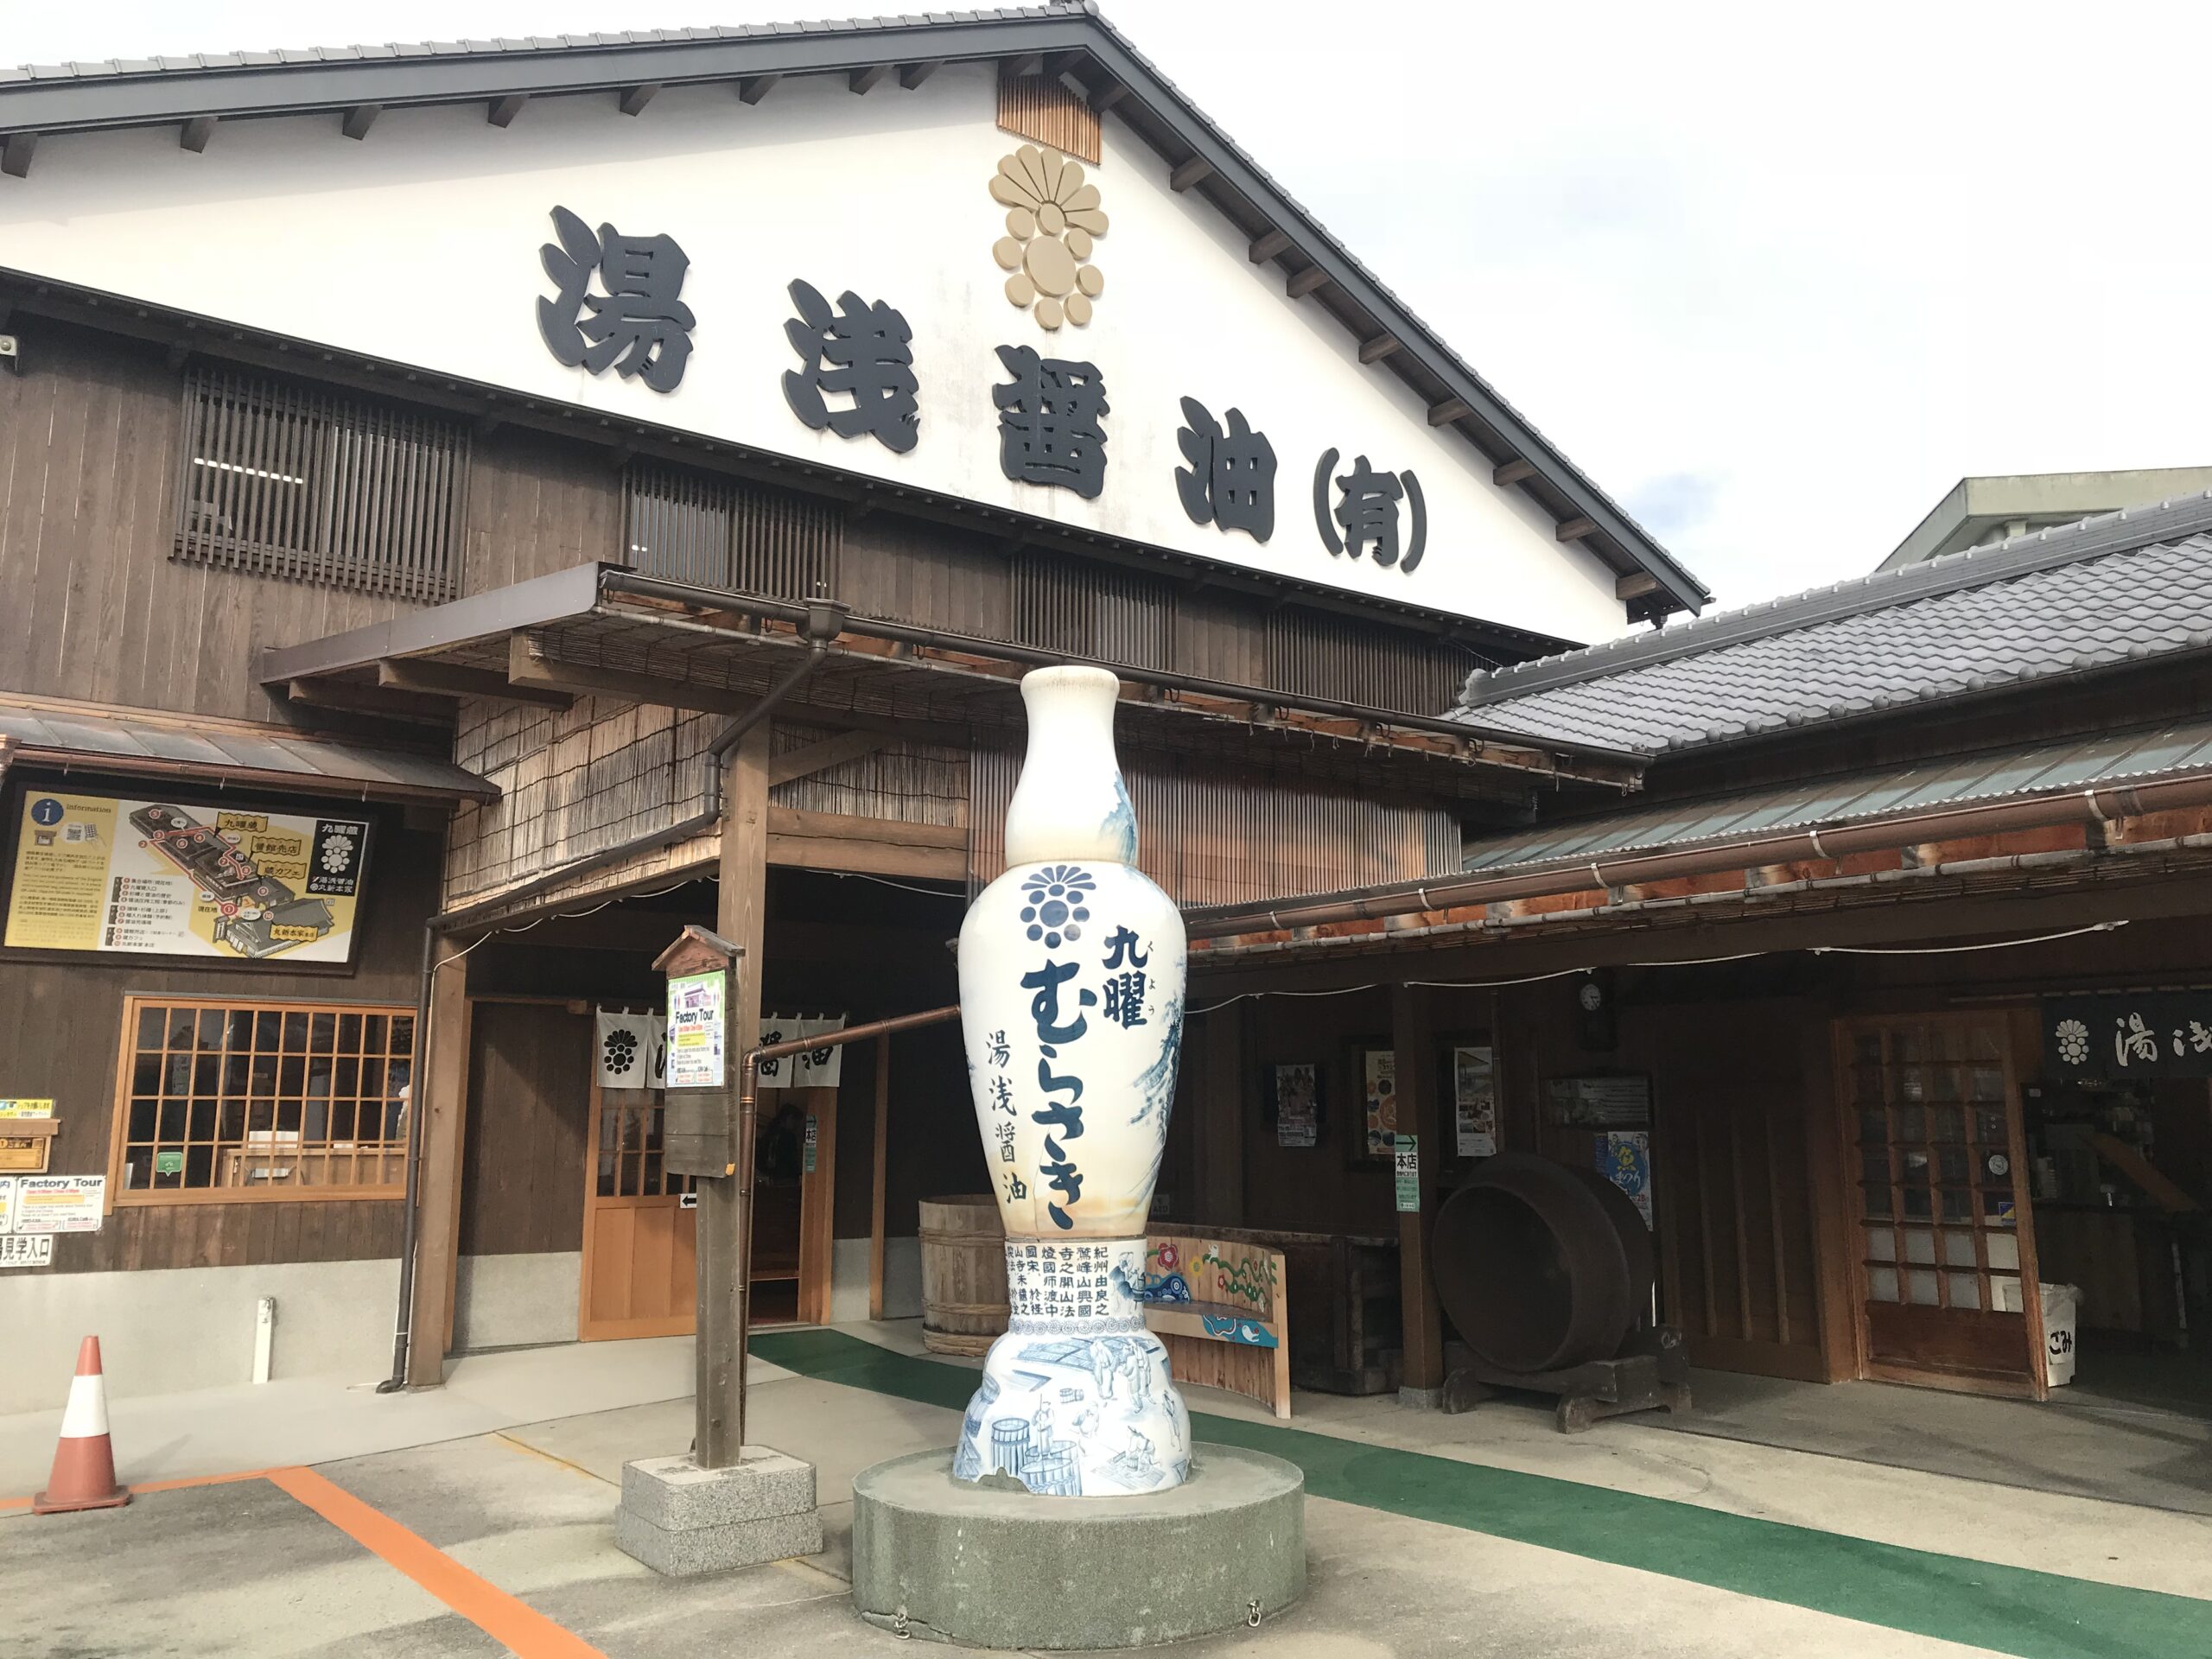 Soy sauce factory in Japan